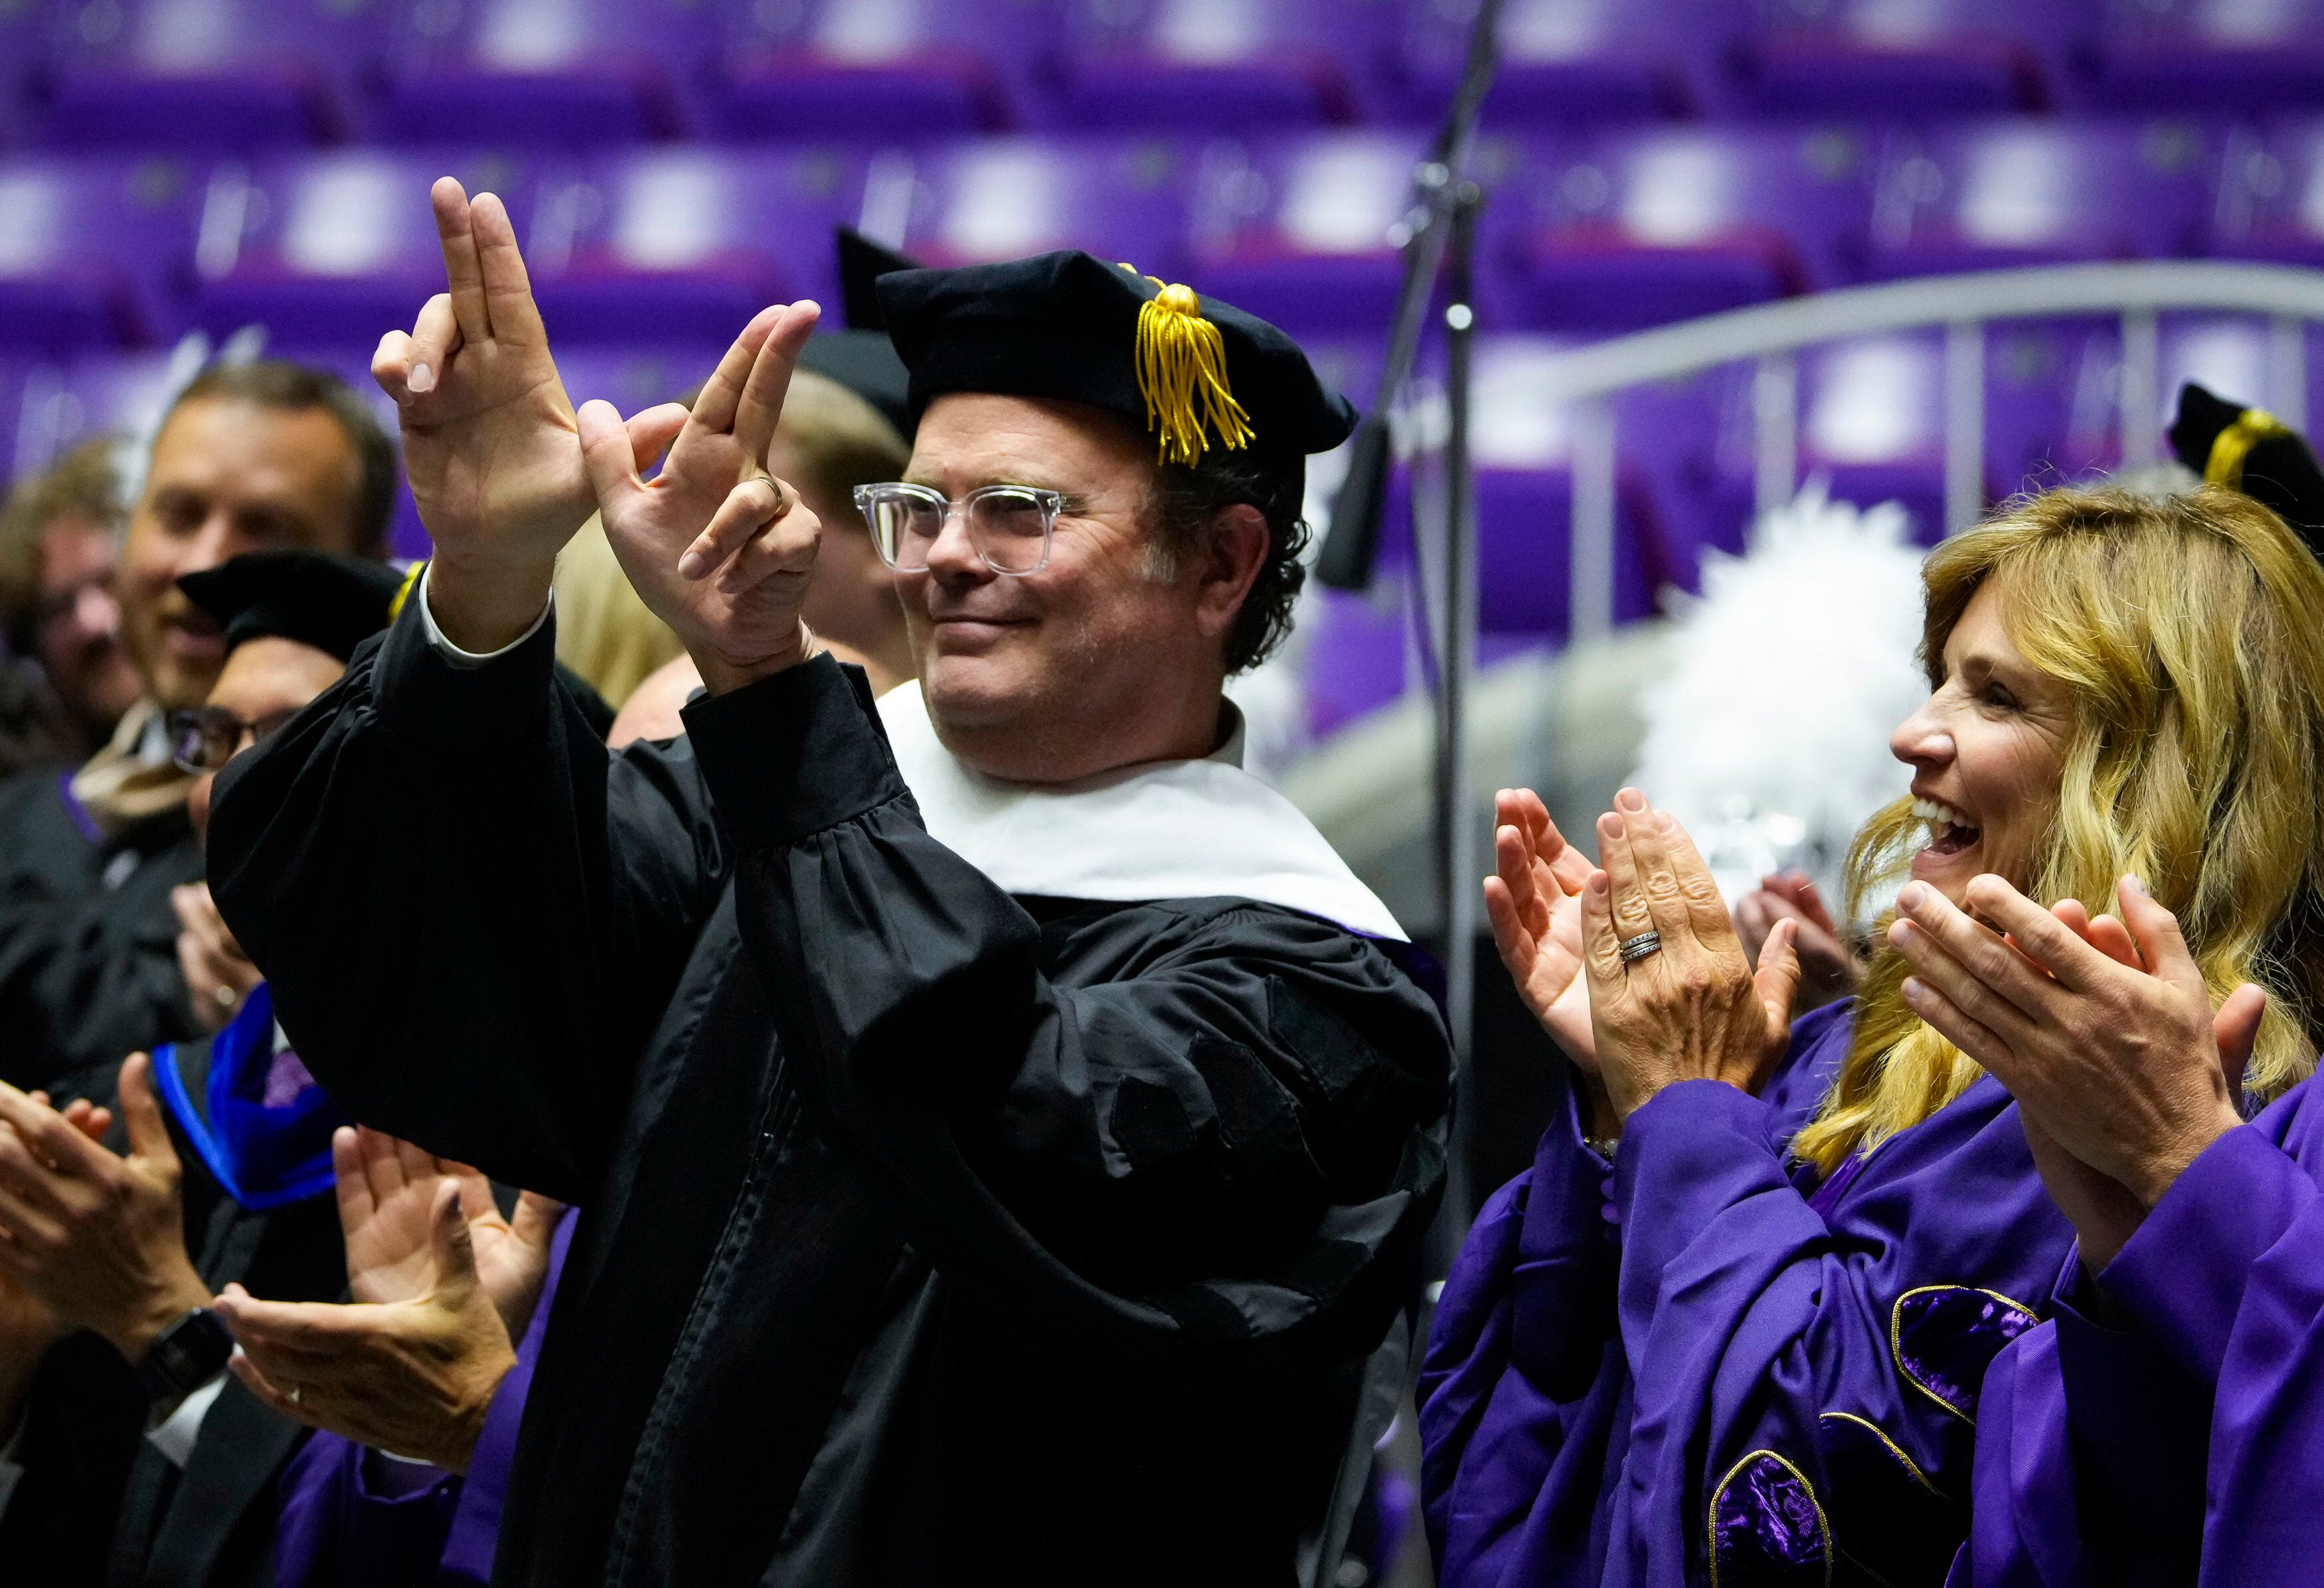 (Bethany Baker  |  The Salt Lake Tribune) Celebrity Rainn Wilson holds up the "W" sign with his hands after he delivers the commencement address at the graduation ceremonies at Weber State University in Ogden on Friday, April 26, 2024.